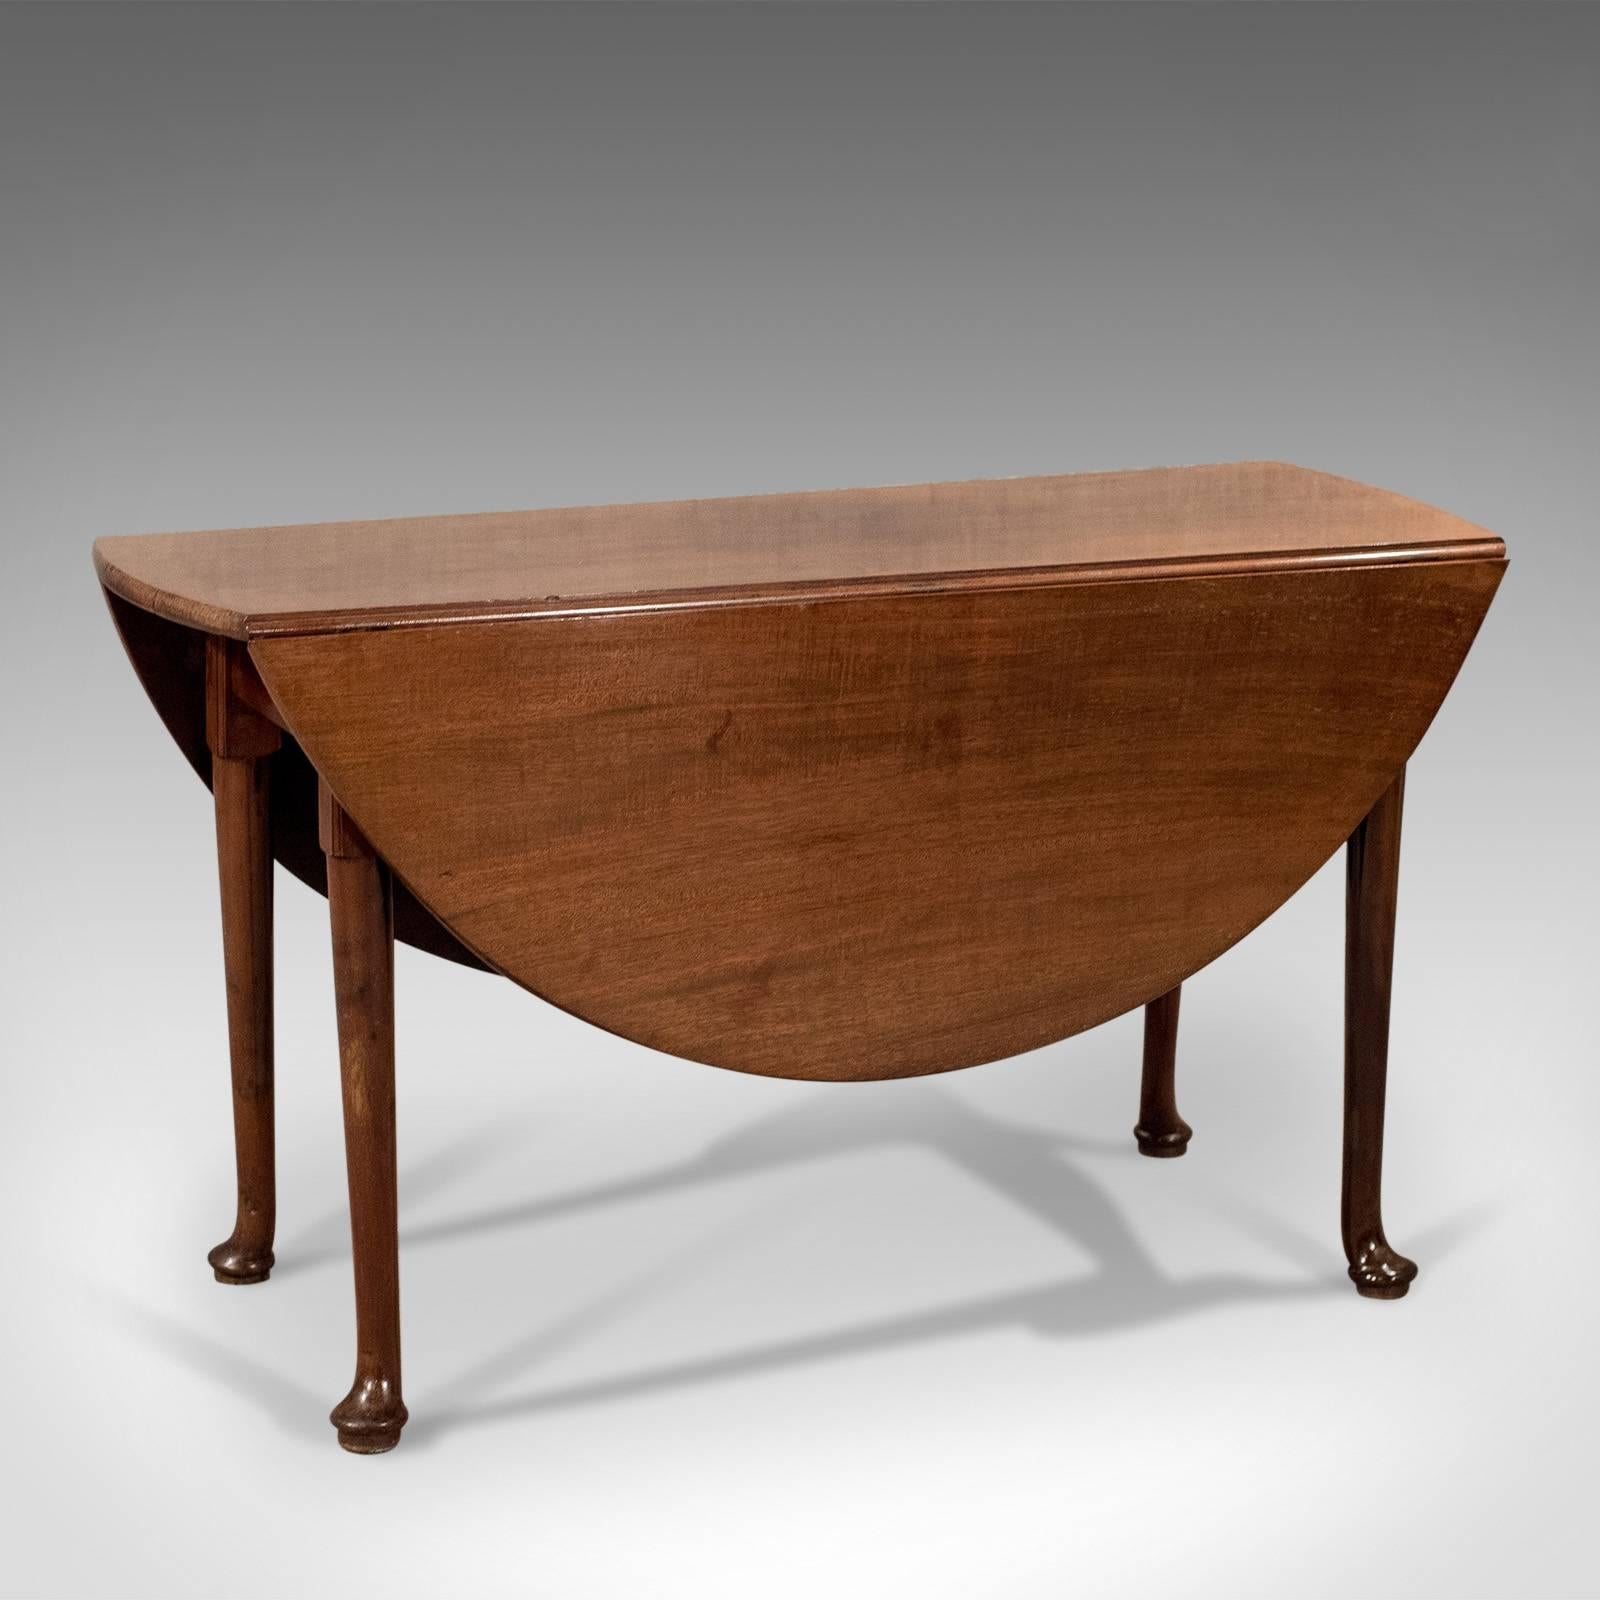 This is an antique drop flap dining table in mahogany. English and dating to the late Georgian period, circa 1800.

Stunning mahogany with a very attractive mid tone
Desirable aged patina with an acquired gentle deflection to the top adding charm